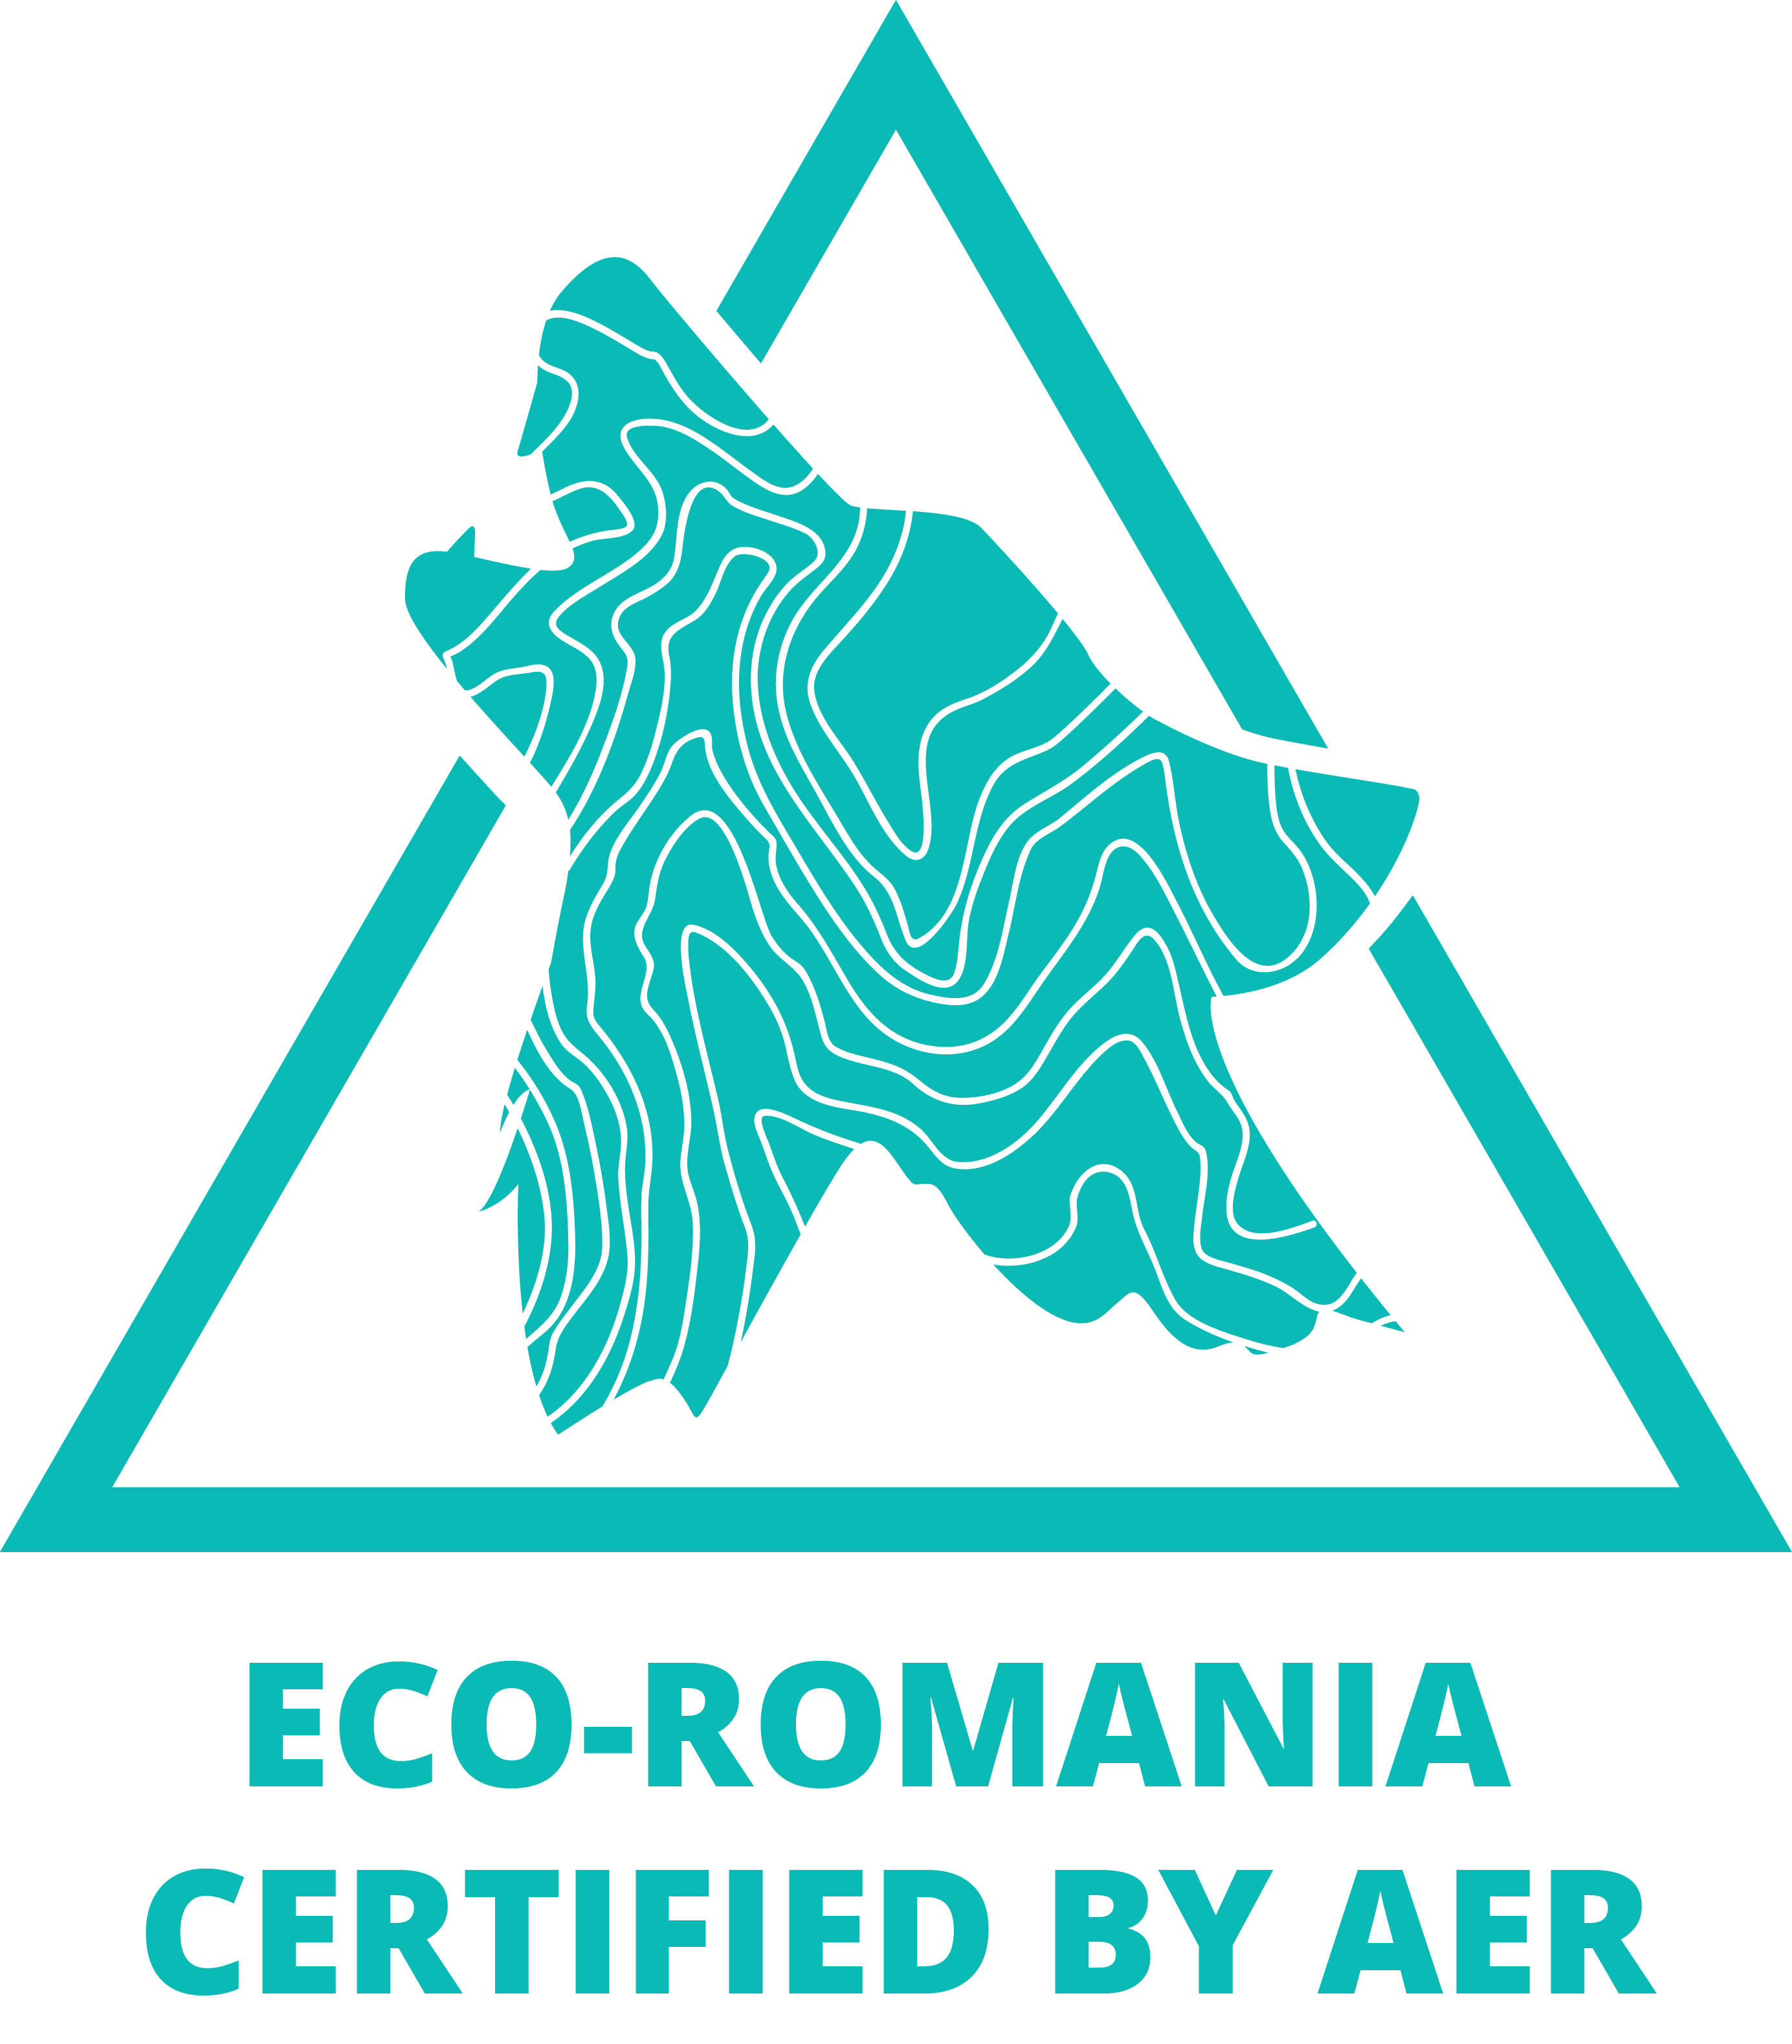 Image result for he Ecotourism Certification System developed by the Association of Ecotourism in Romania (AER)